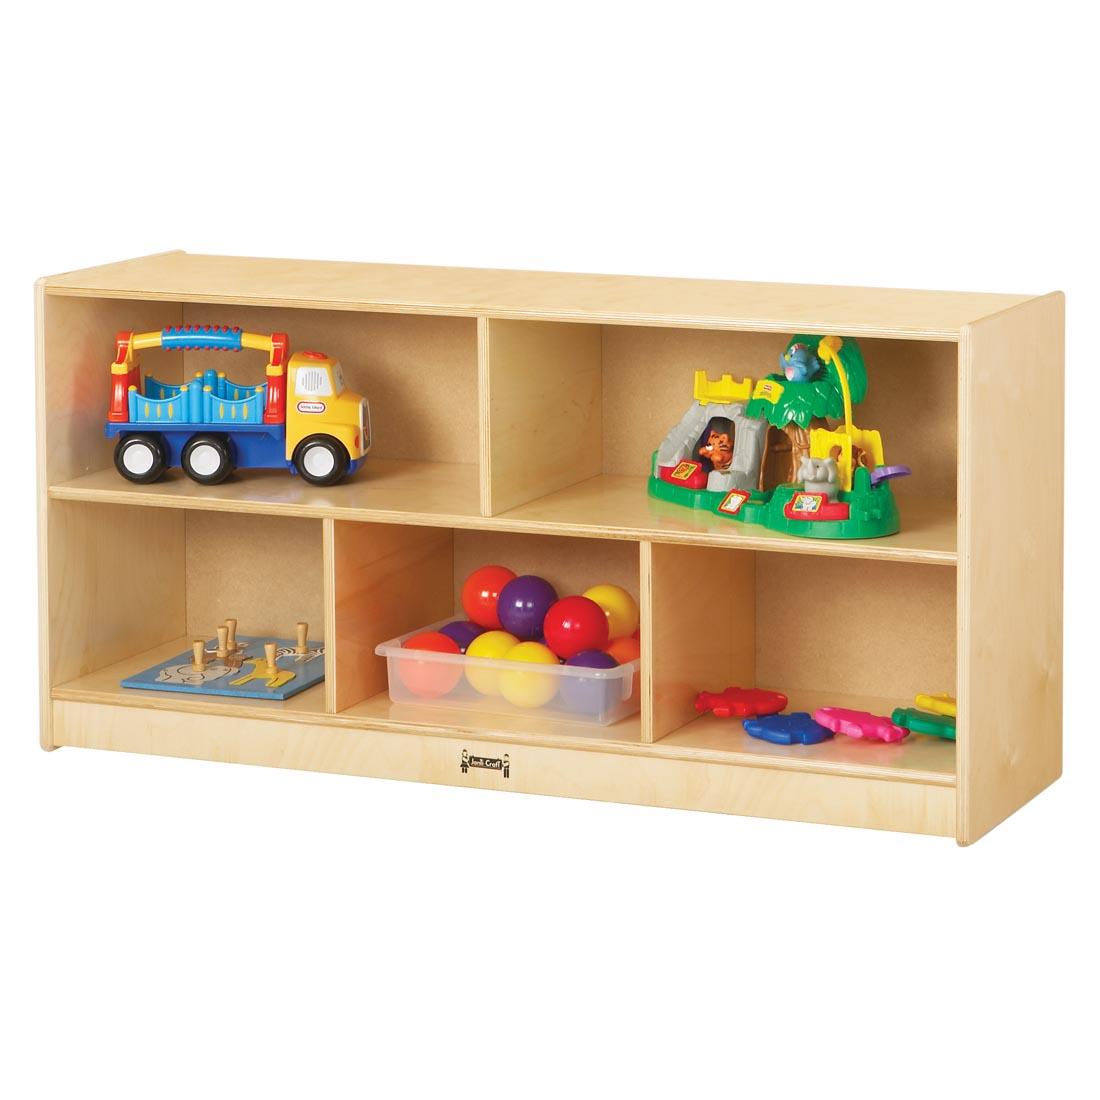 Birch Toddler Storage Unit shown with suggested storage contents